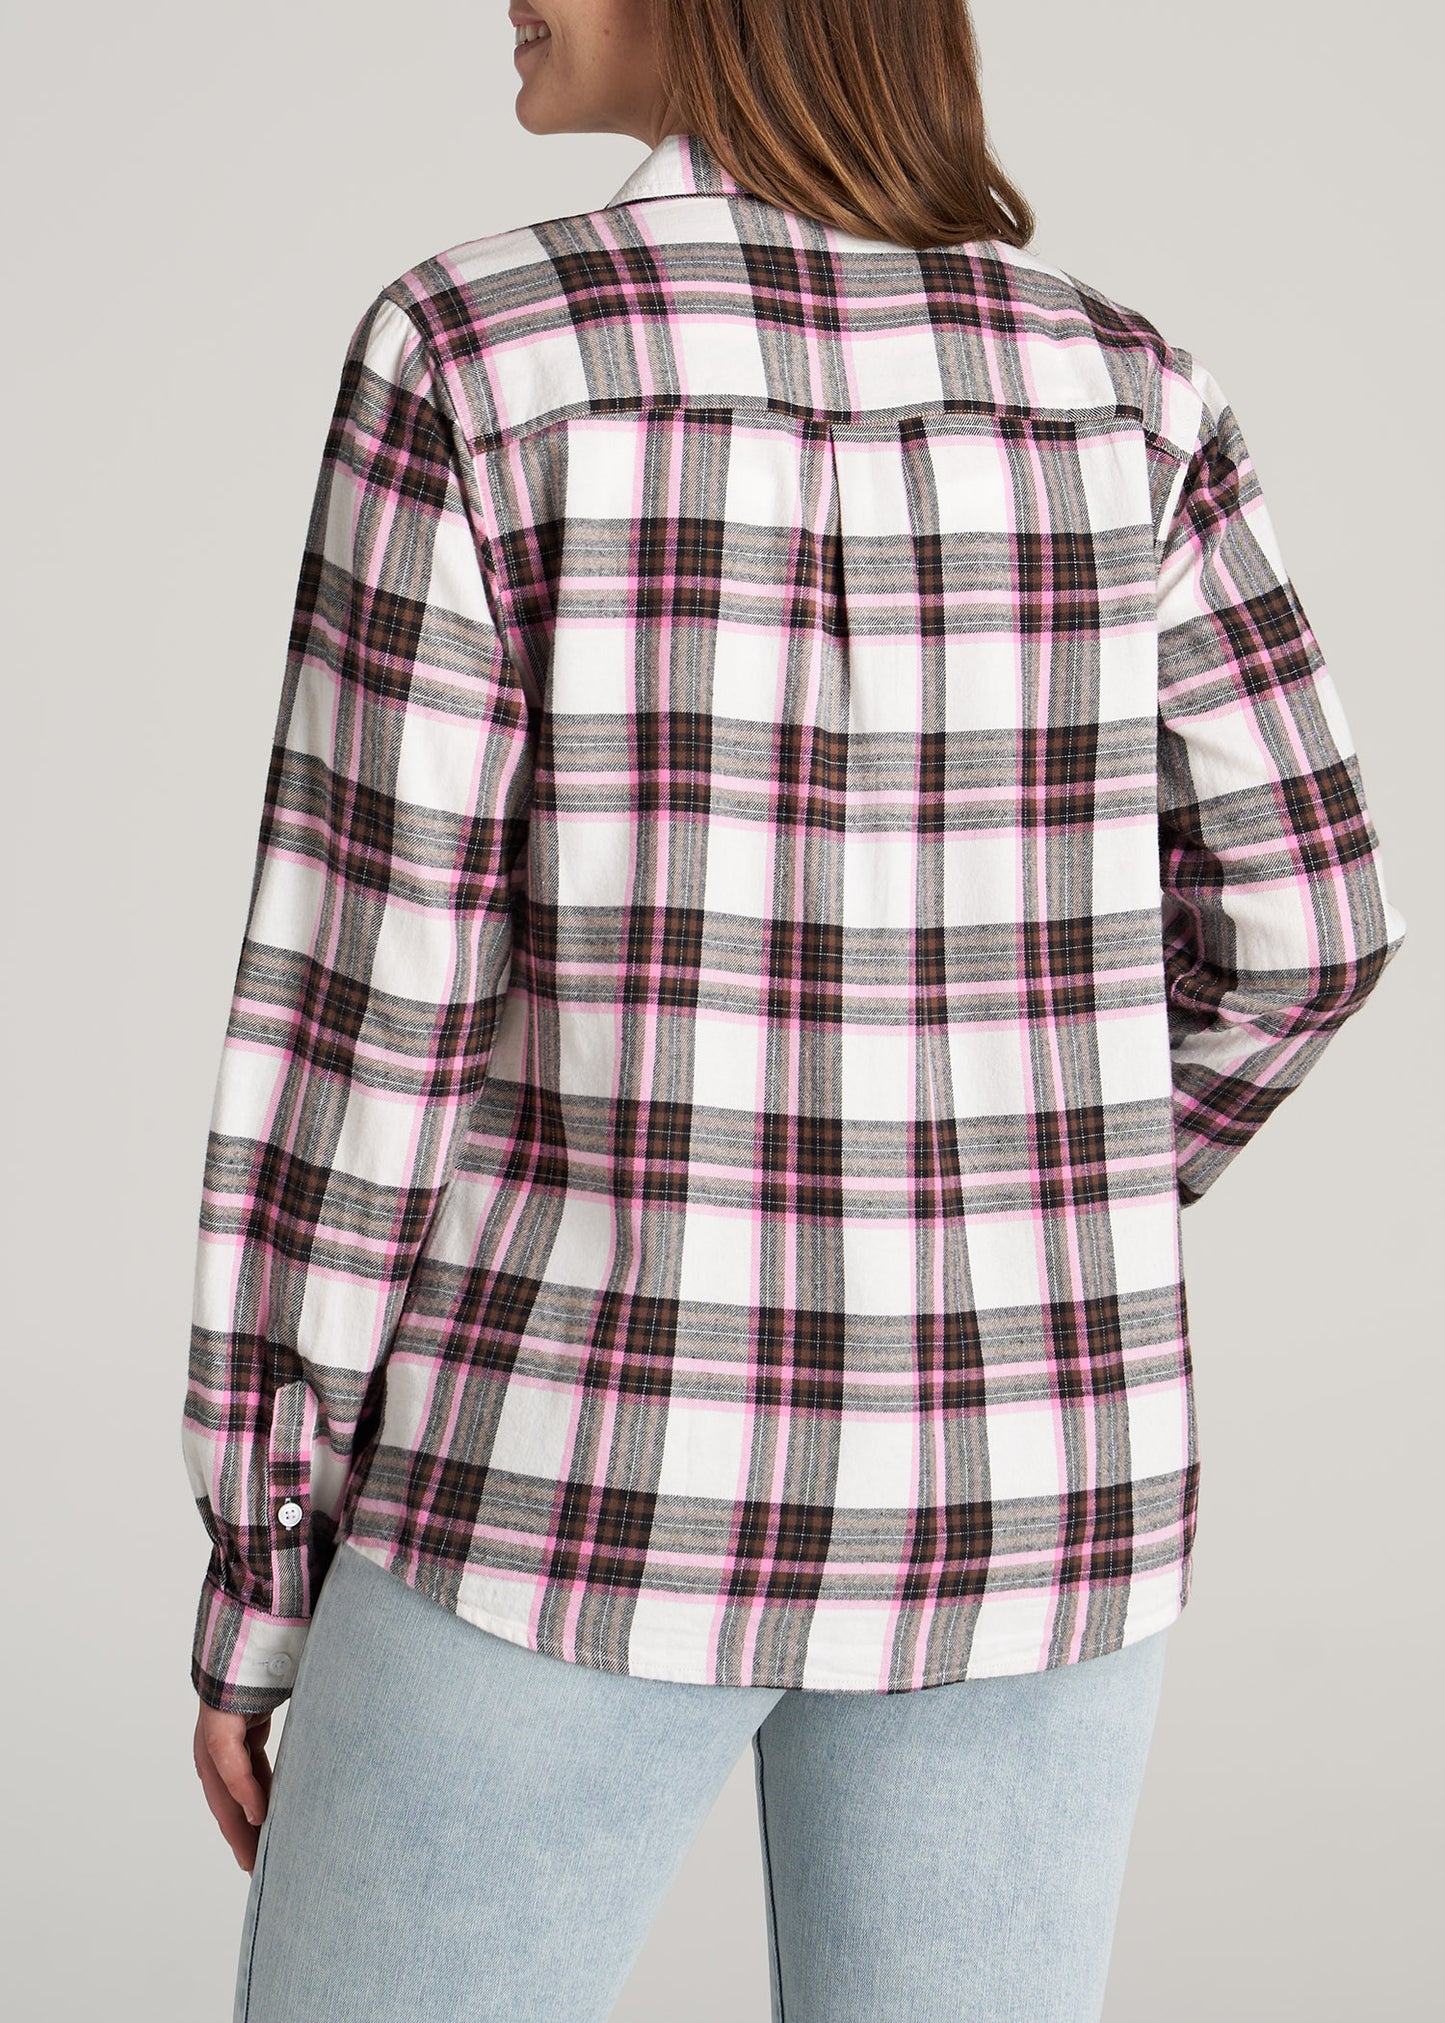    American-Tall-Women-Flannel-Button-up-Shirt-Pink-Copper-Plaid-back